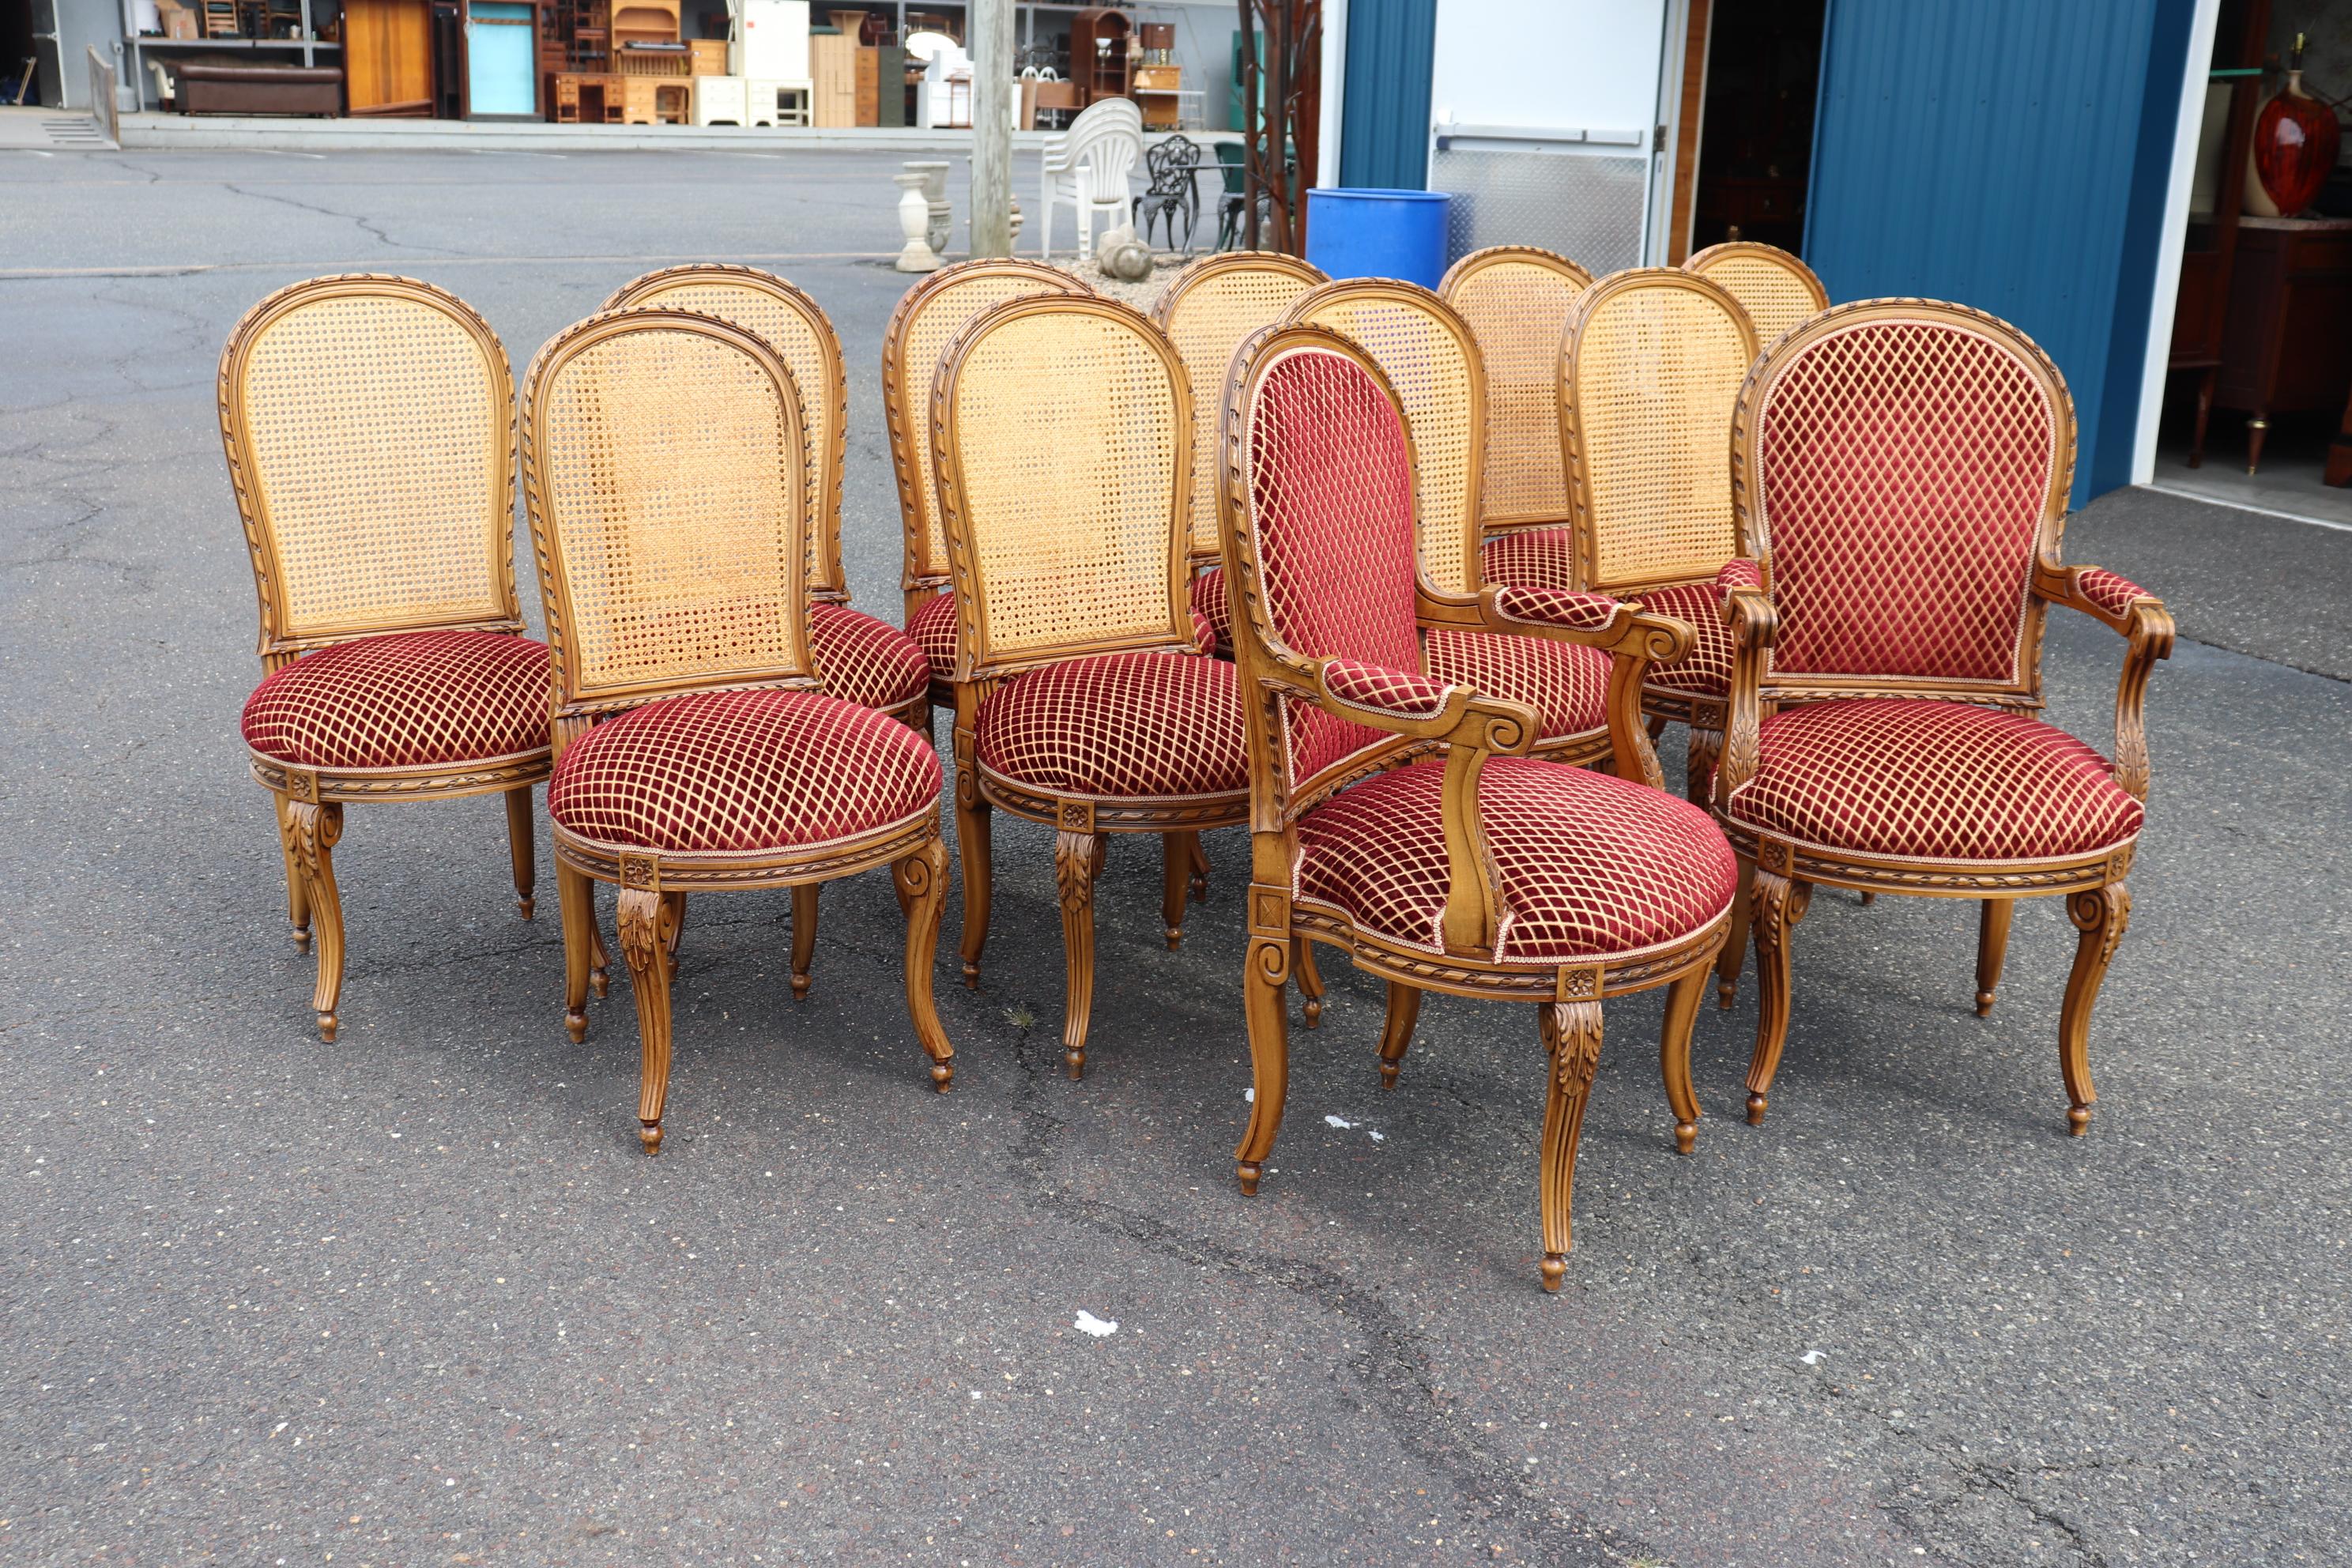 This is a fantastic set of 12 dining chairs in excellent condition. They have new caned backs and no damage and very good velvet seats in excellent condition. They are comfortable and feature superb carving. They date to teh 1960s era and are